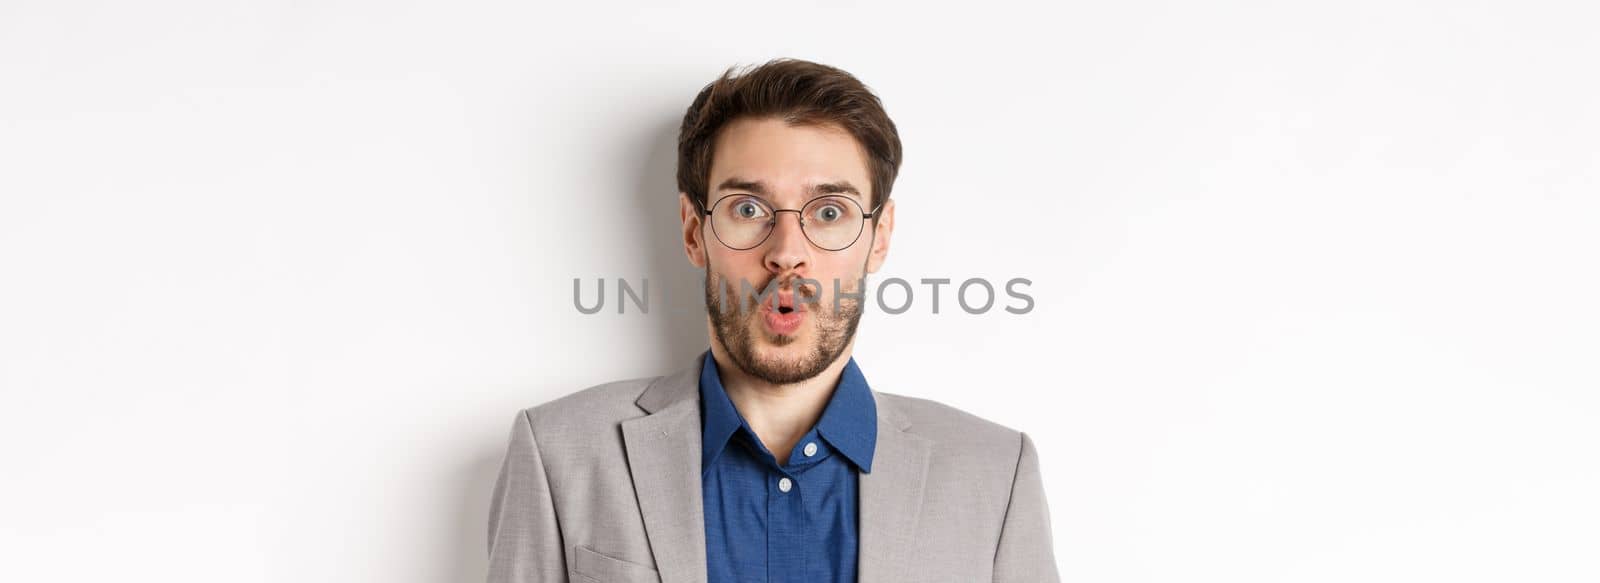 Close up portrait of excited office worker in glasses and suit saying wow, staring amazed at camera, standing against white background.